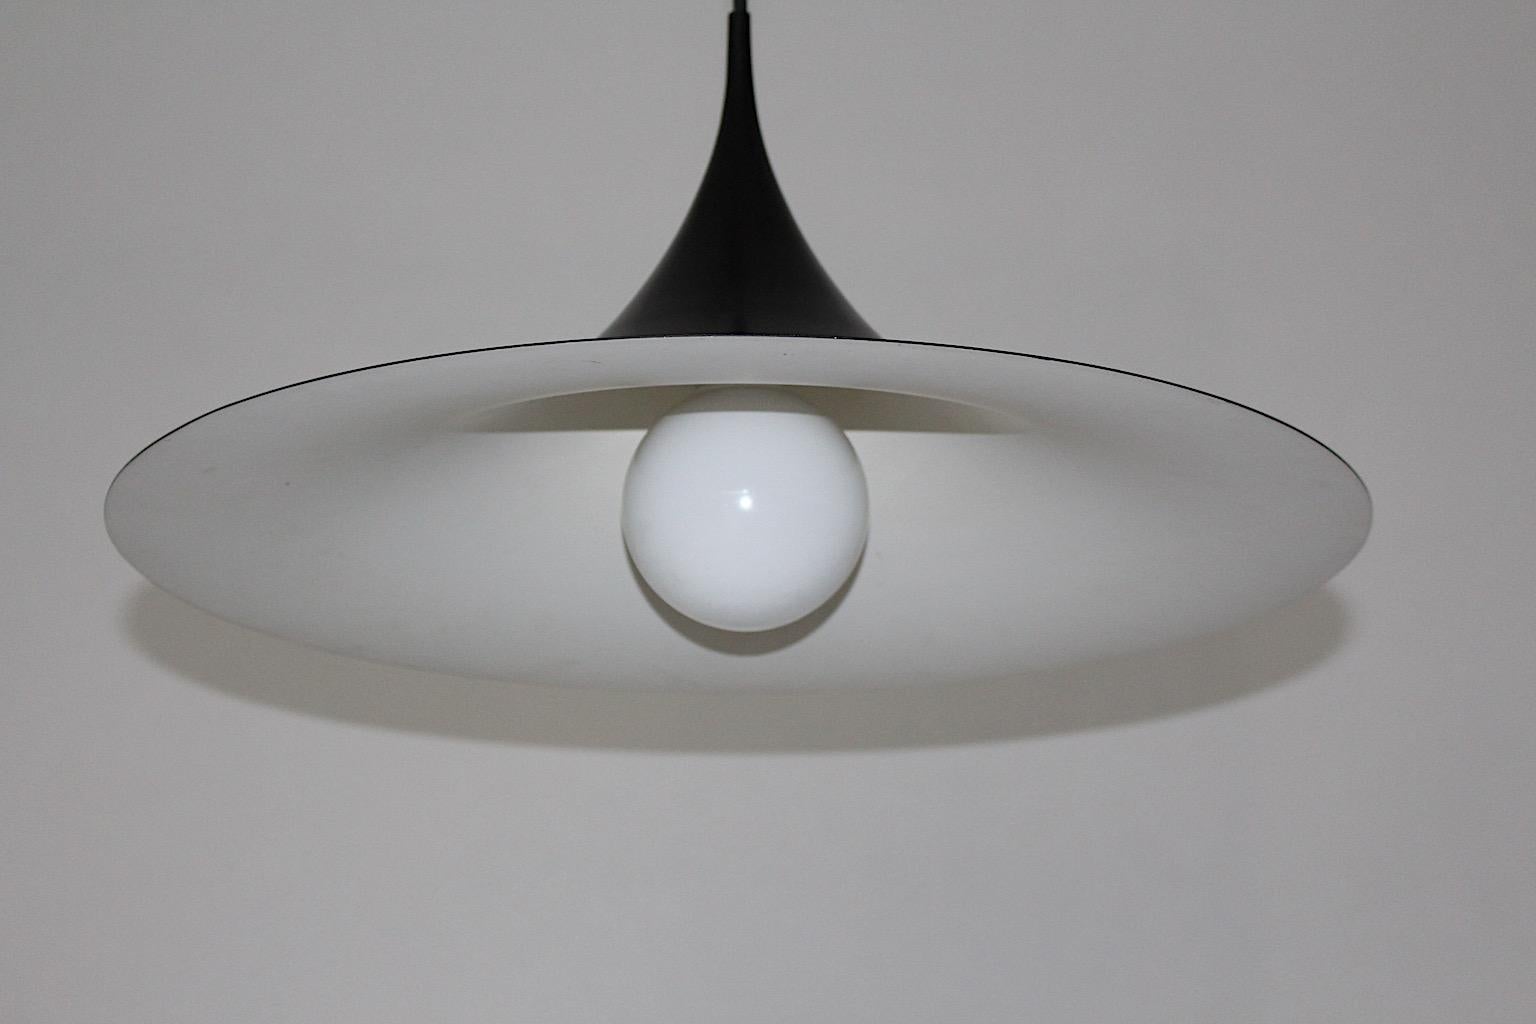 Scandinavian Modern enameled black vintage pendant or chandelier Semi designed by Claus Bonderup & Torsten Thorup, 1967, Denmark.
Beautiful iconic design in good vintage condition.
The surface is from black metal, while the inside shows white